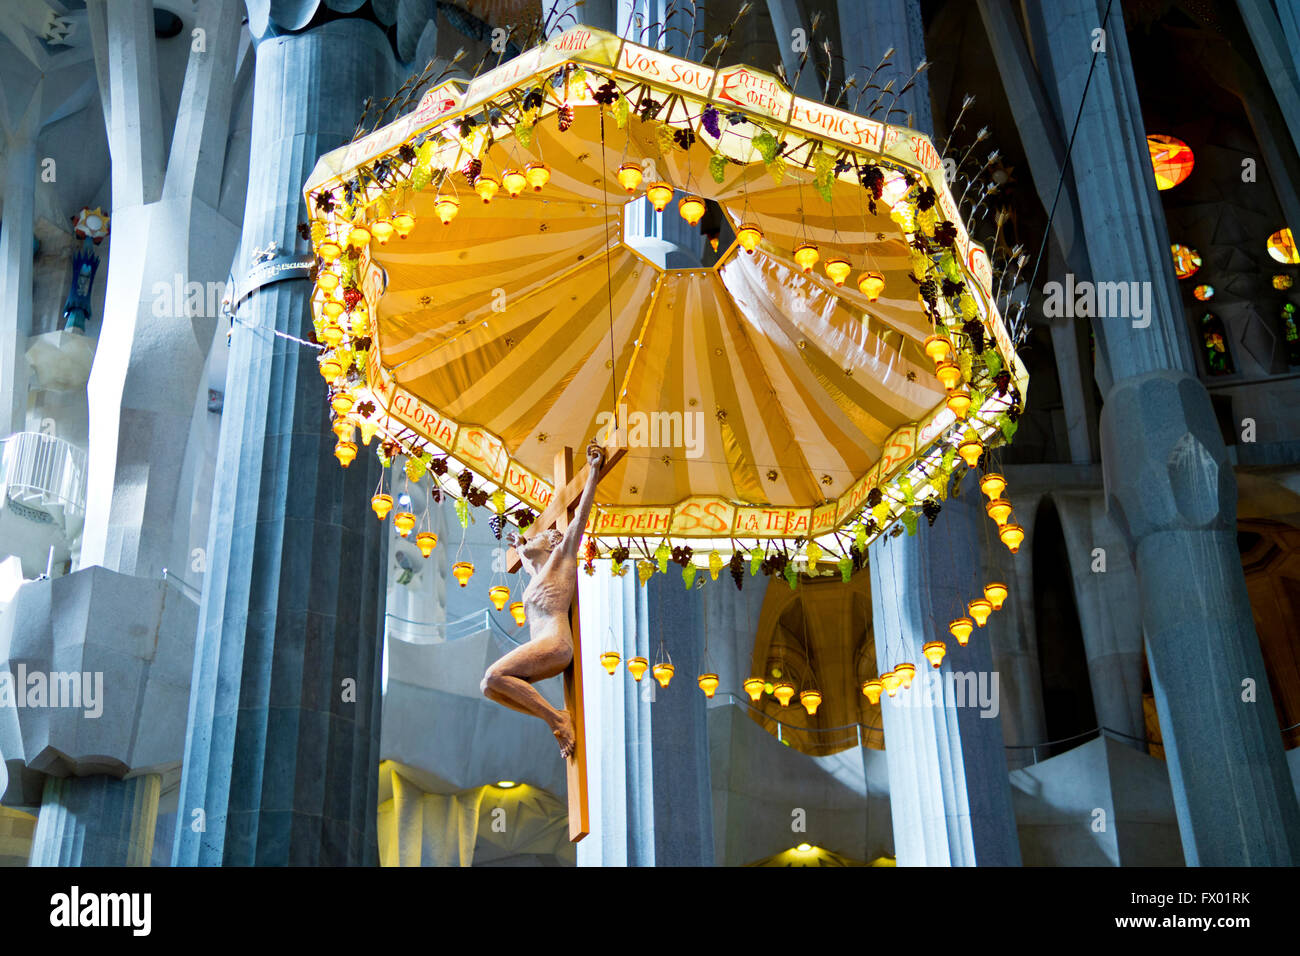 Inside the Sagrada Familia with a depiction of Christ on the cross at the altar, Barcelona, Spain Stock Photo